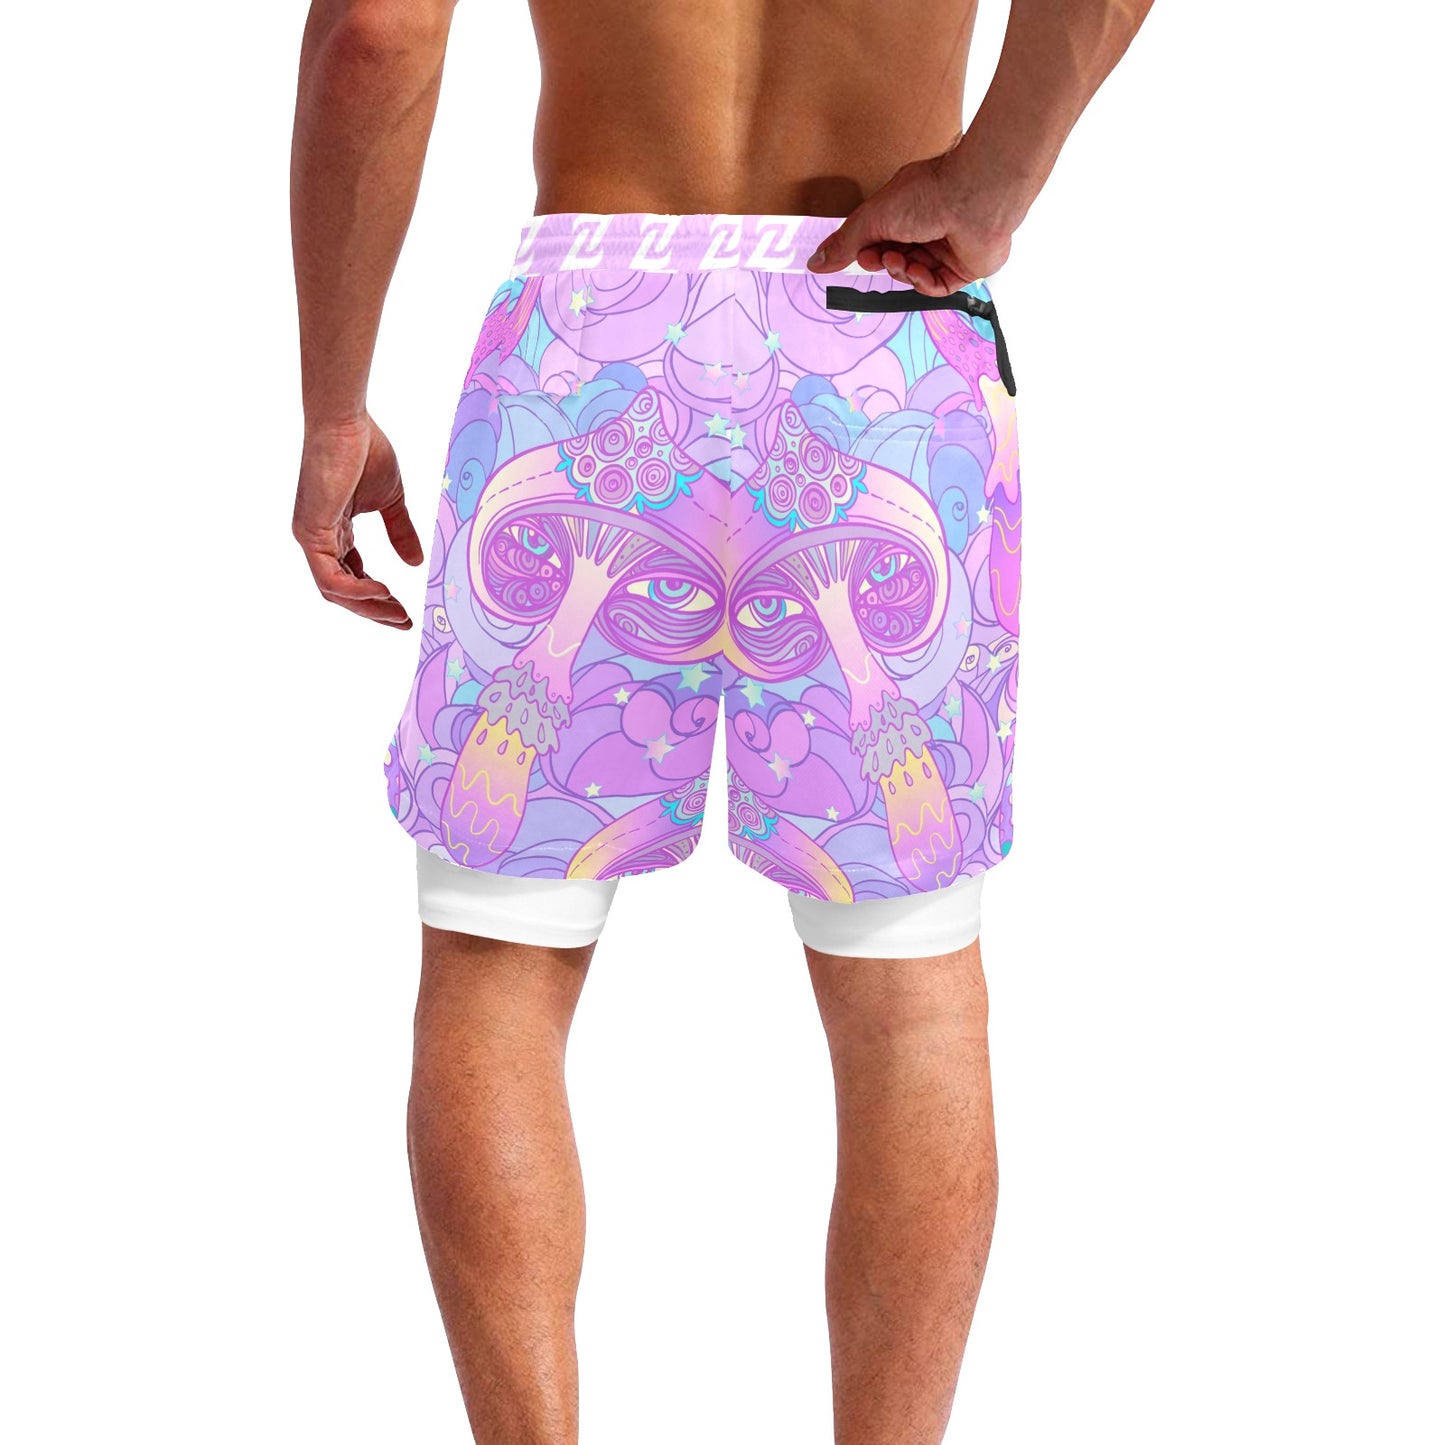 Zen Shorts with Liner - Psychedelic